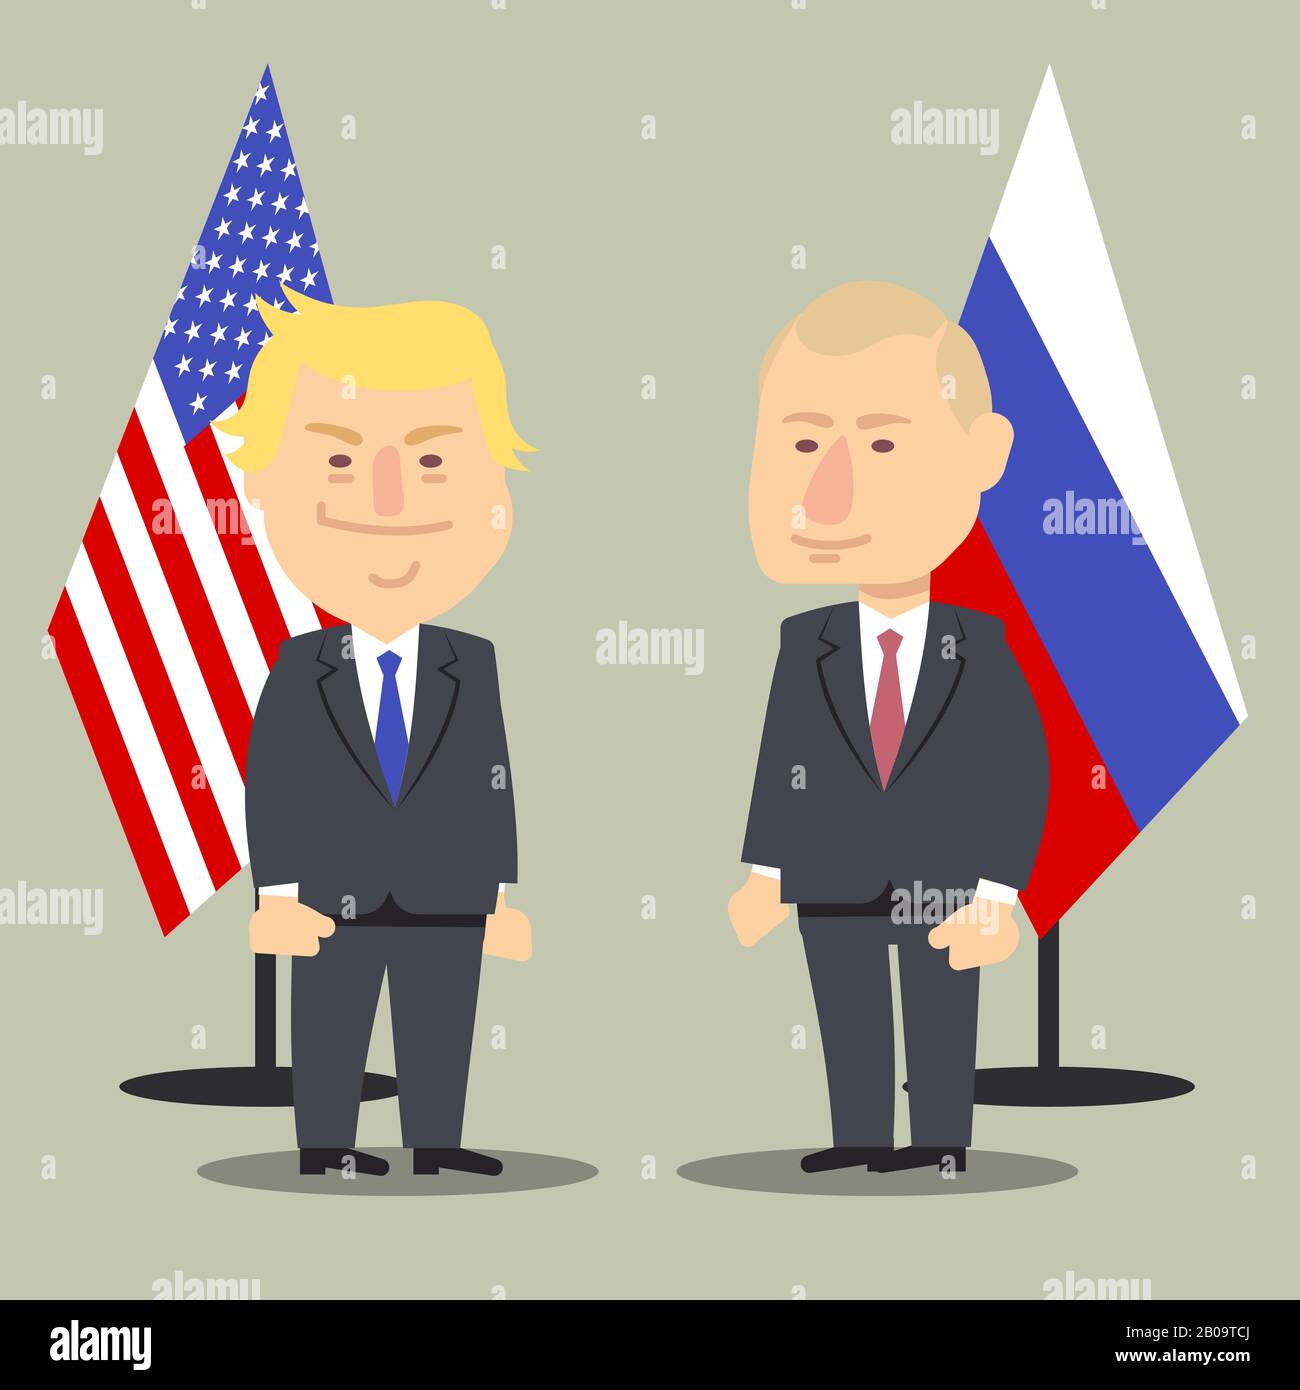 Donald Trump and Vladimir Putin standing together with Russian and USA flags. Vector illustration, cartoon political caricature. Politician putin and trump, government presidents america and russian Stock Vector